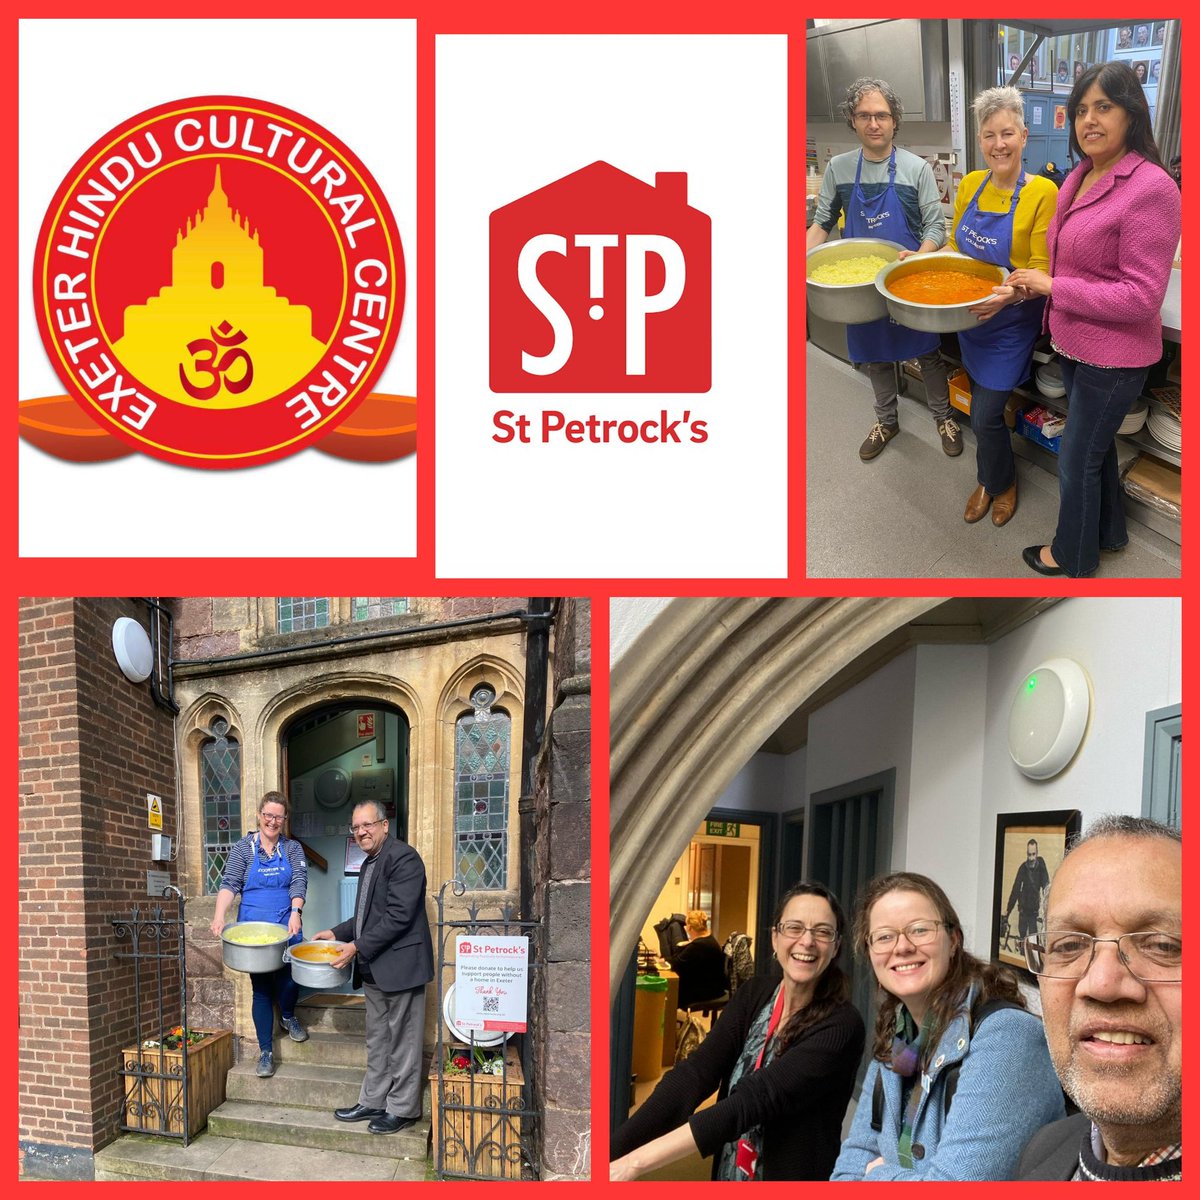 Visited @StPetrocks today - Indra from @exeterhtemple had made curry for the #Homeless. Great to be able to support this essential work through our @coopuk local community fund, to meet the amazing team of people there & find out more about the support they offer ❤️ ~ Sarah